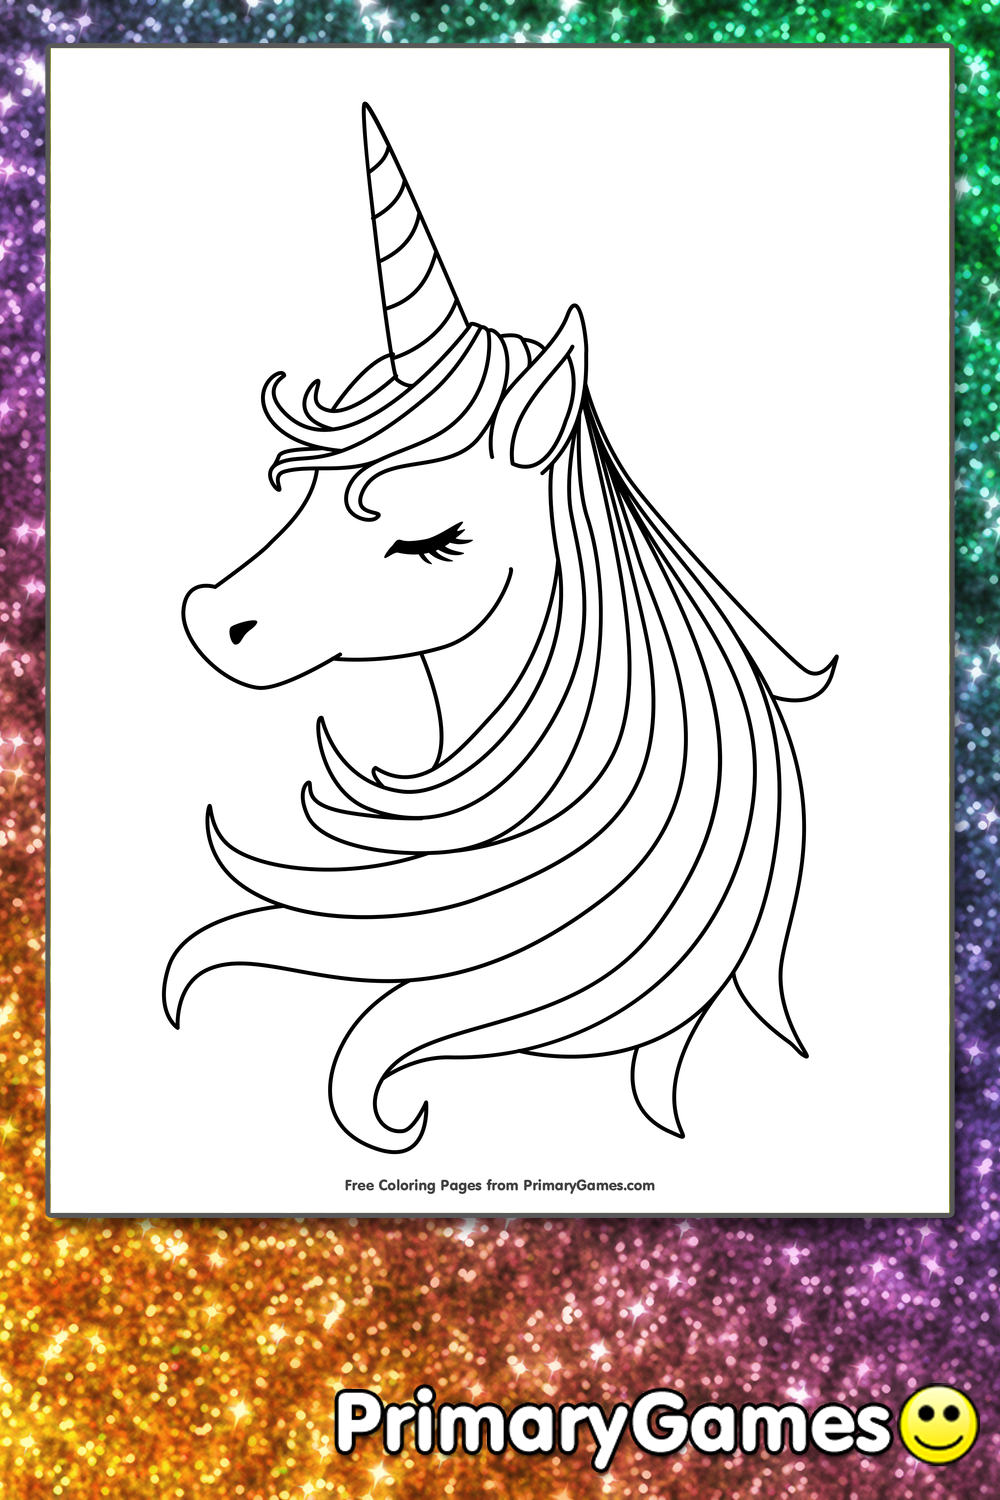 Sleeping Unicorn Coloring Page • FREE Printable PDF from PrimaryGames